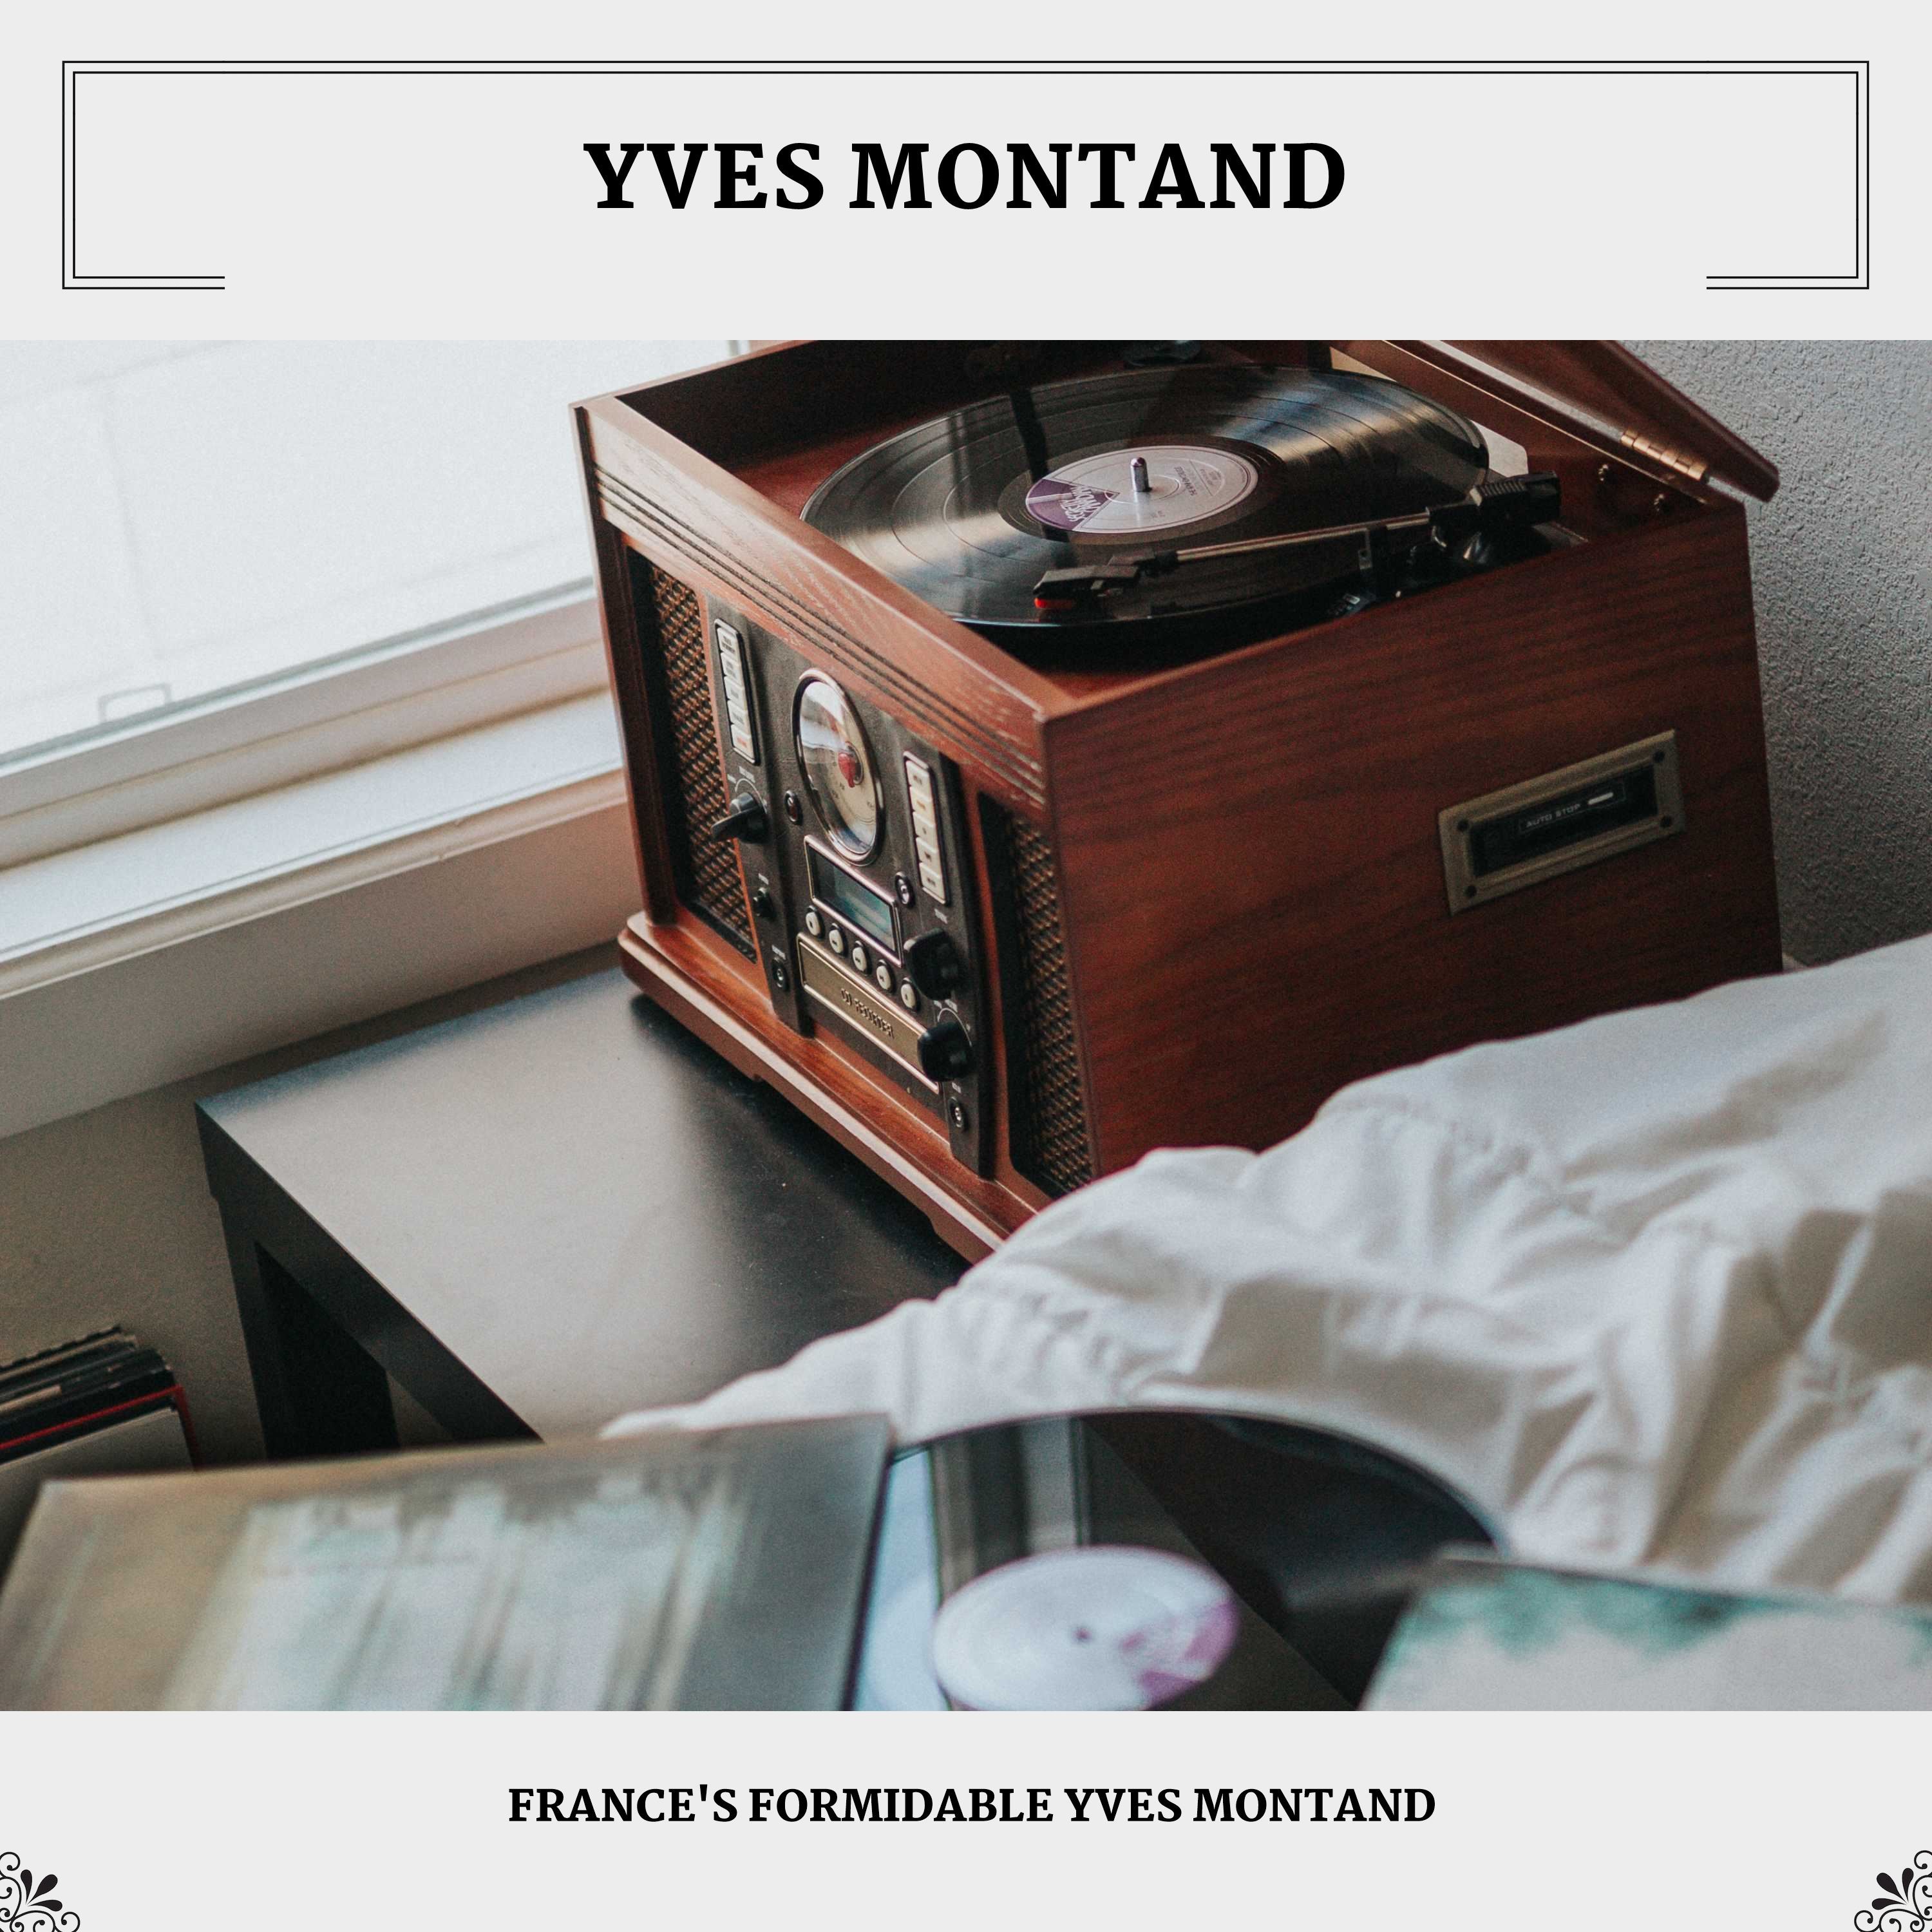 France's Formidable Yves Montand